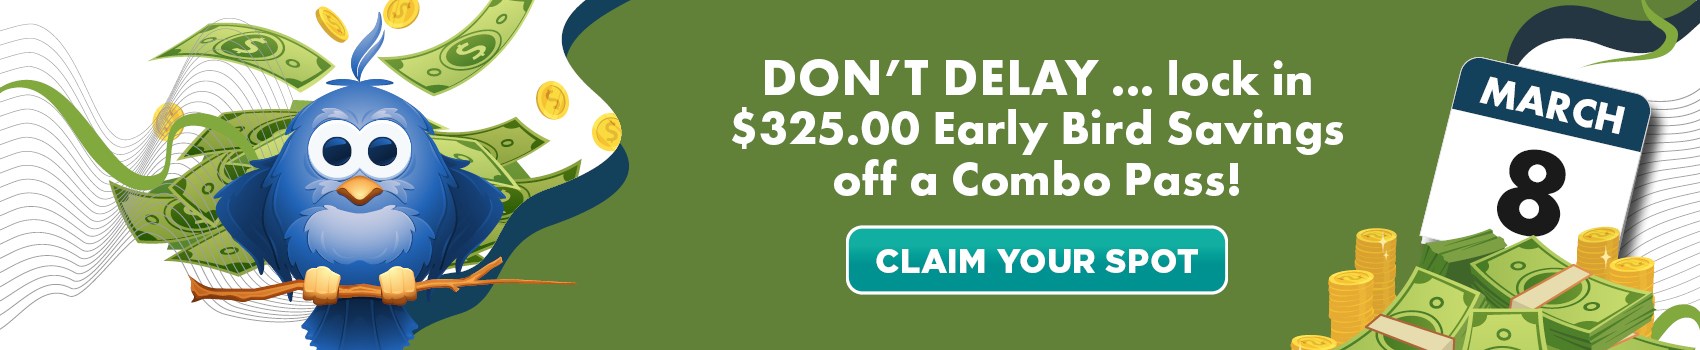 Don’t delay … lock in $325.00 Early Bird Savings off a Combo Pass! CLAIM YOUR SPOT